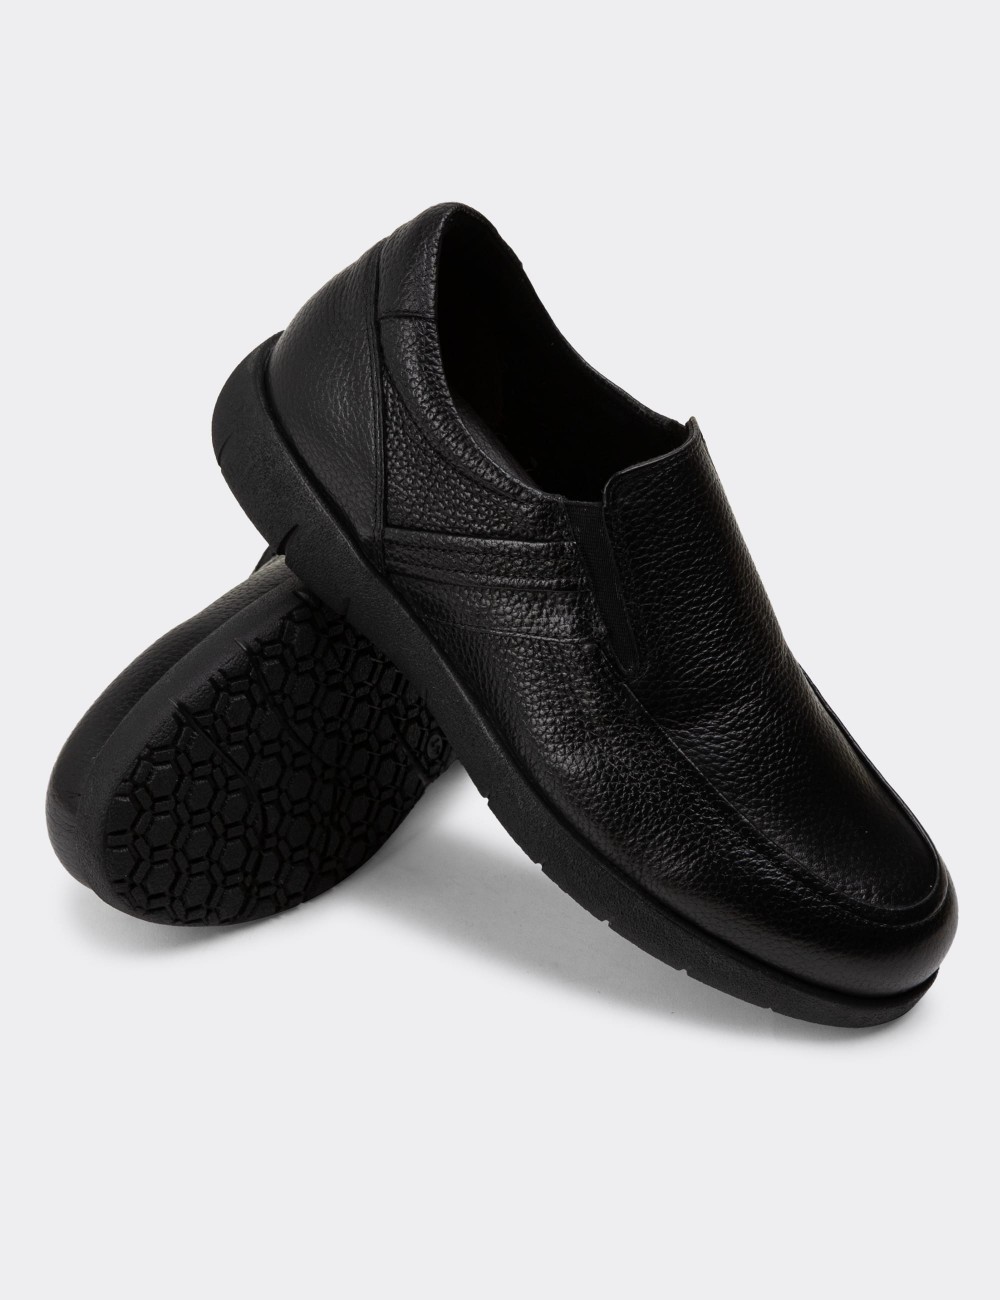 Black Leather Loafers - 01946MSYHC01